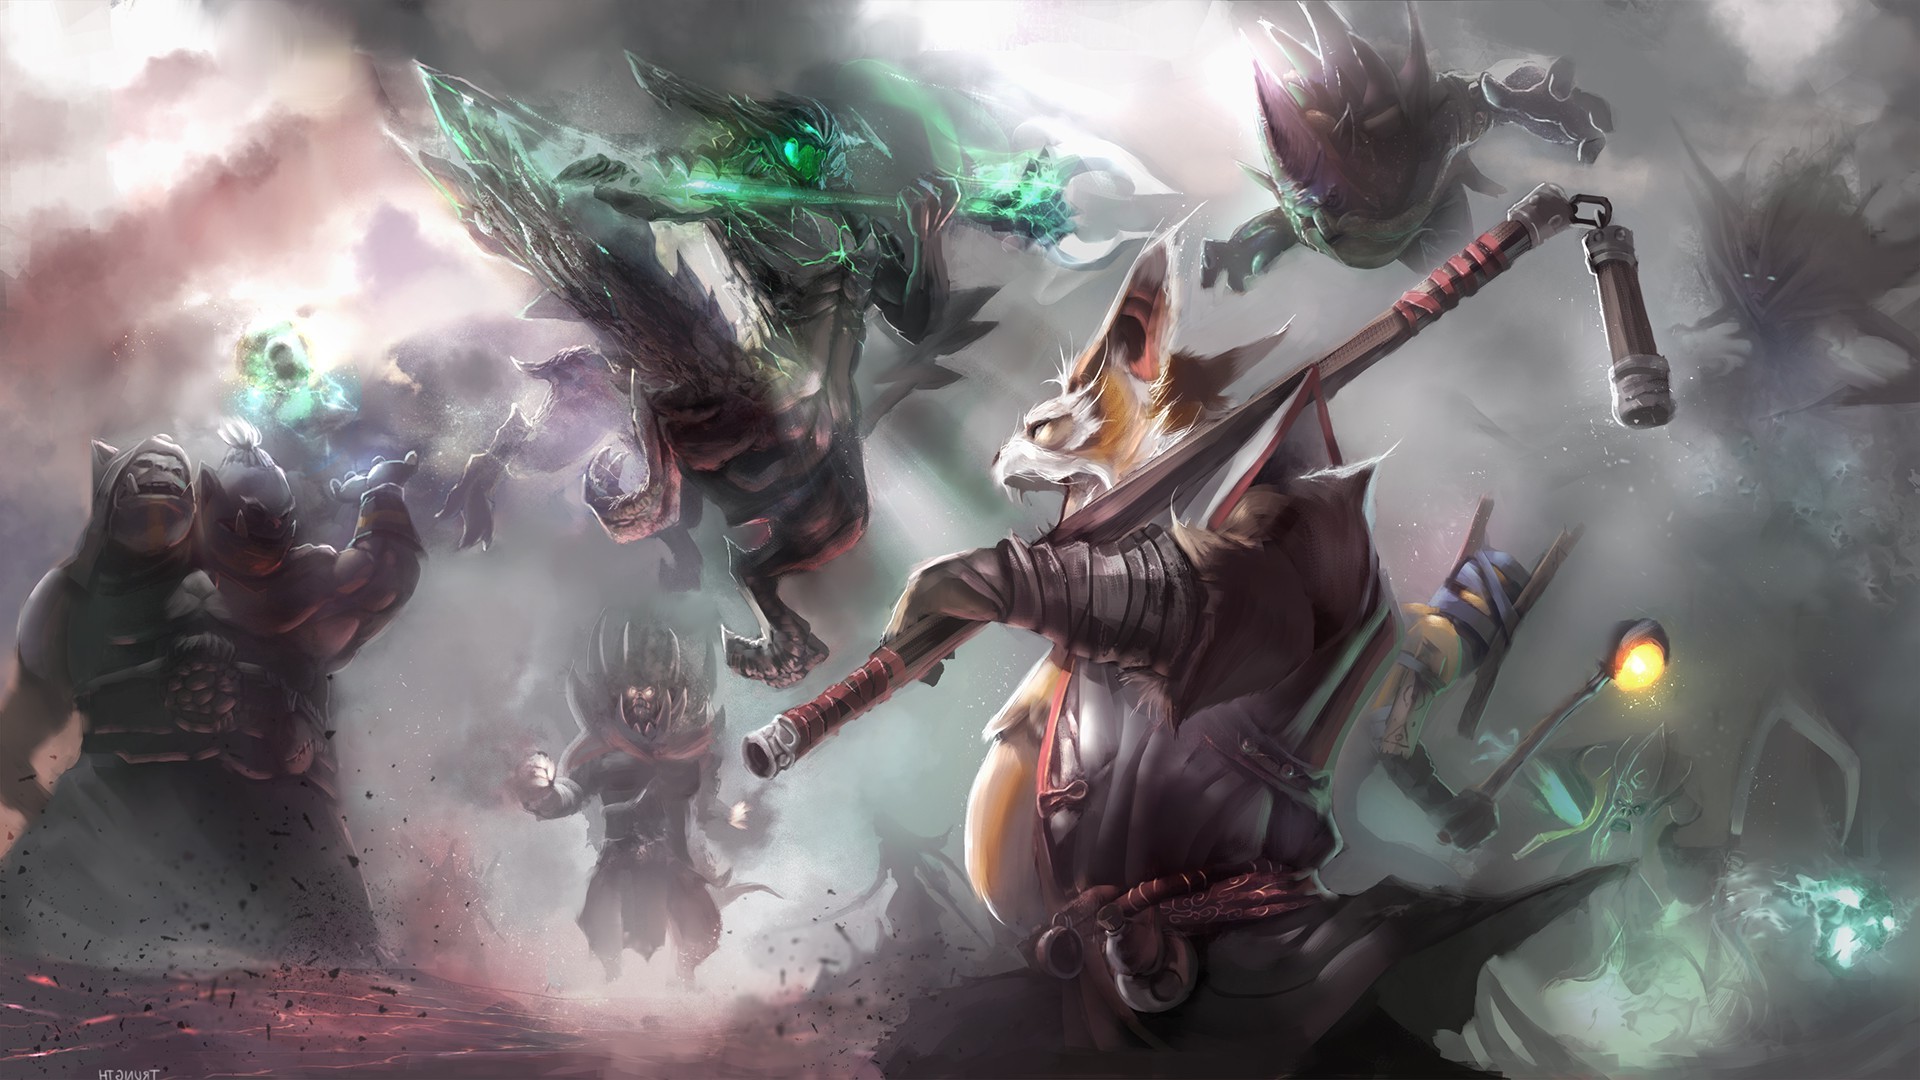 Dota 2 Wallpapers Hd Desktop And Mobile Backgrounds